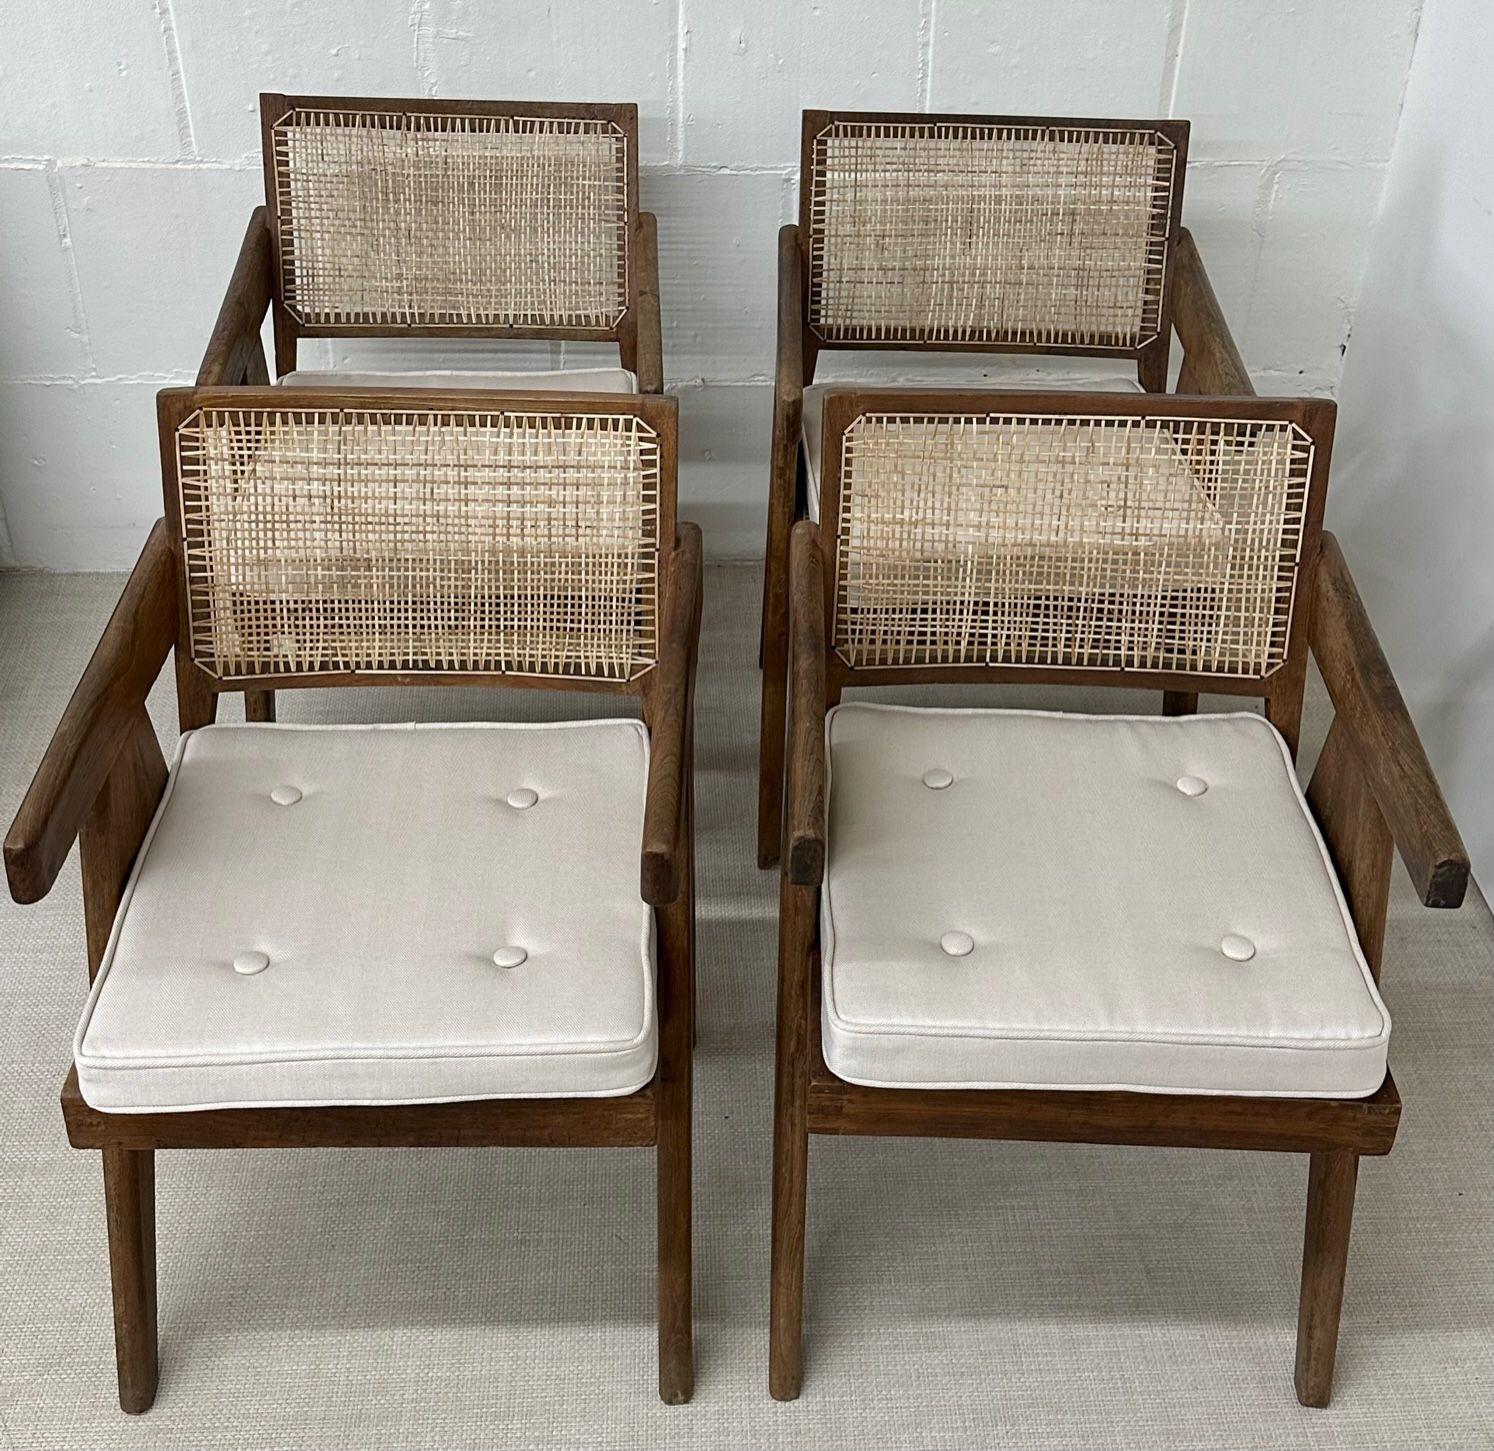 Pierre Jeanneret, Mid-Century Modern, Dining Chairs, Teak, Cane, India, 1960s 10